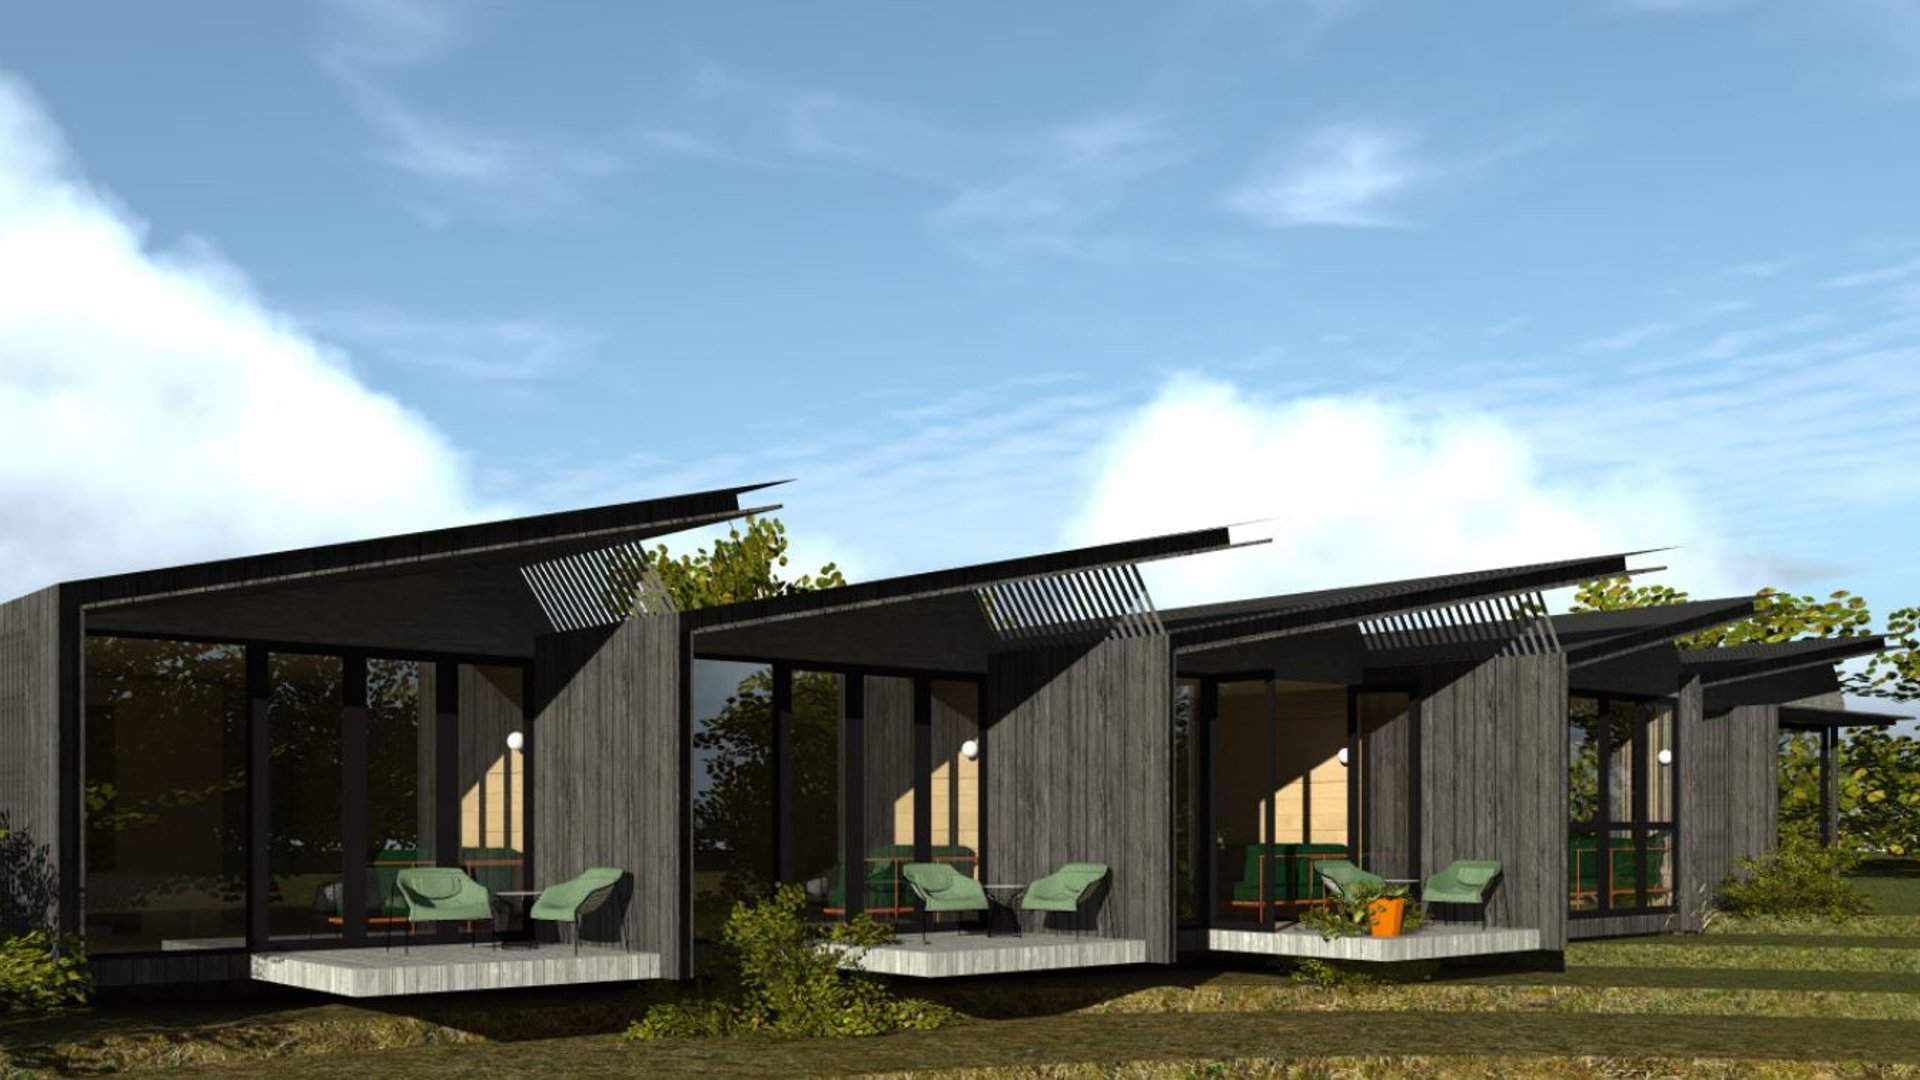 The Peninsula Hot Springs' Latest Expansion Plans Include New Eco Lodges and Outdoor Massage Pods